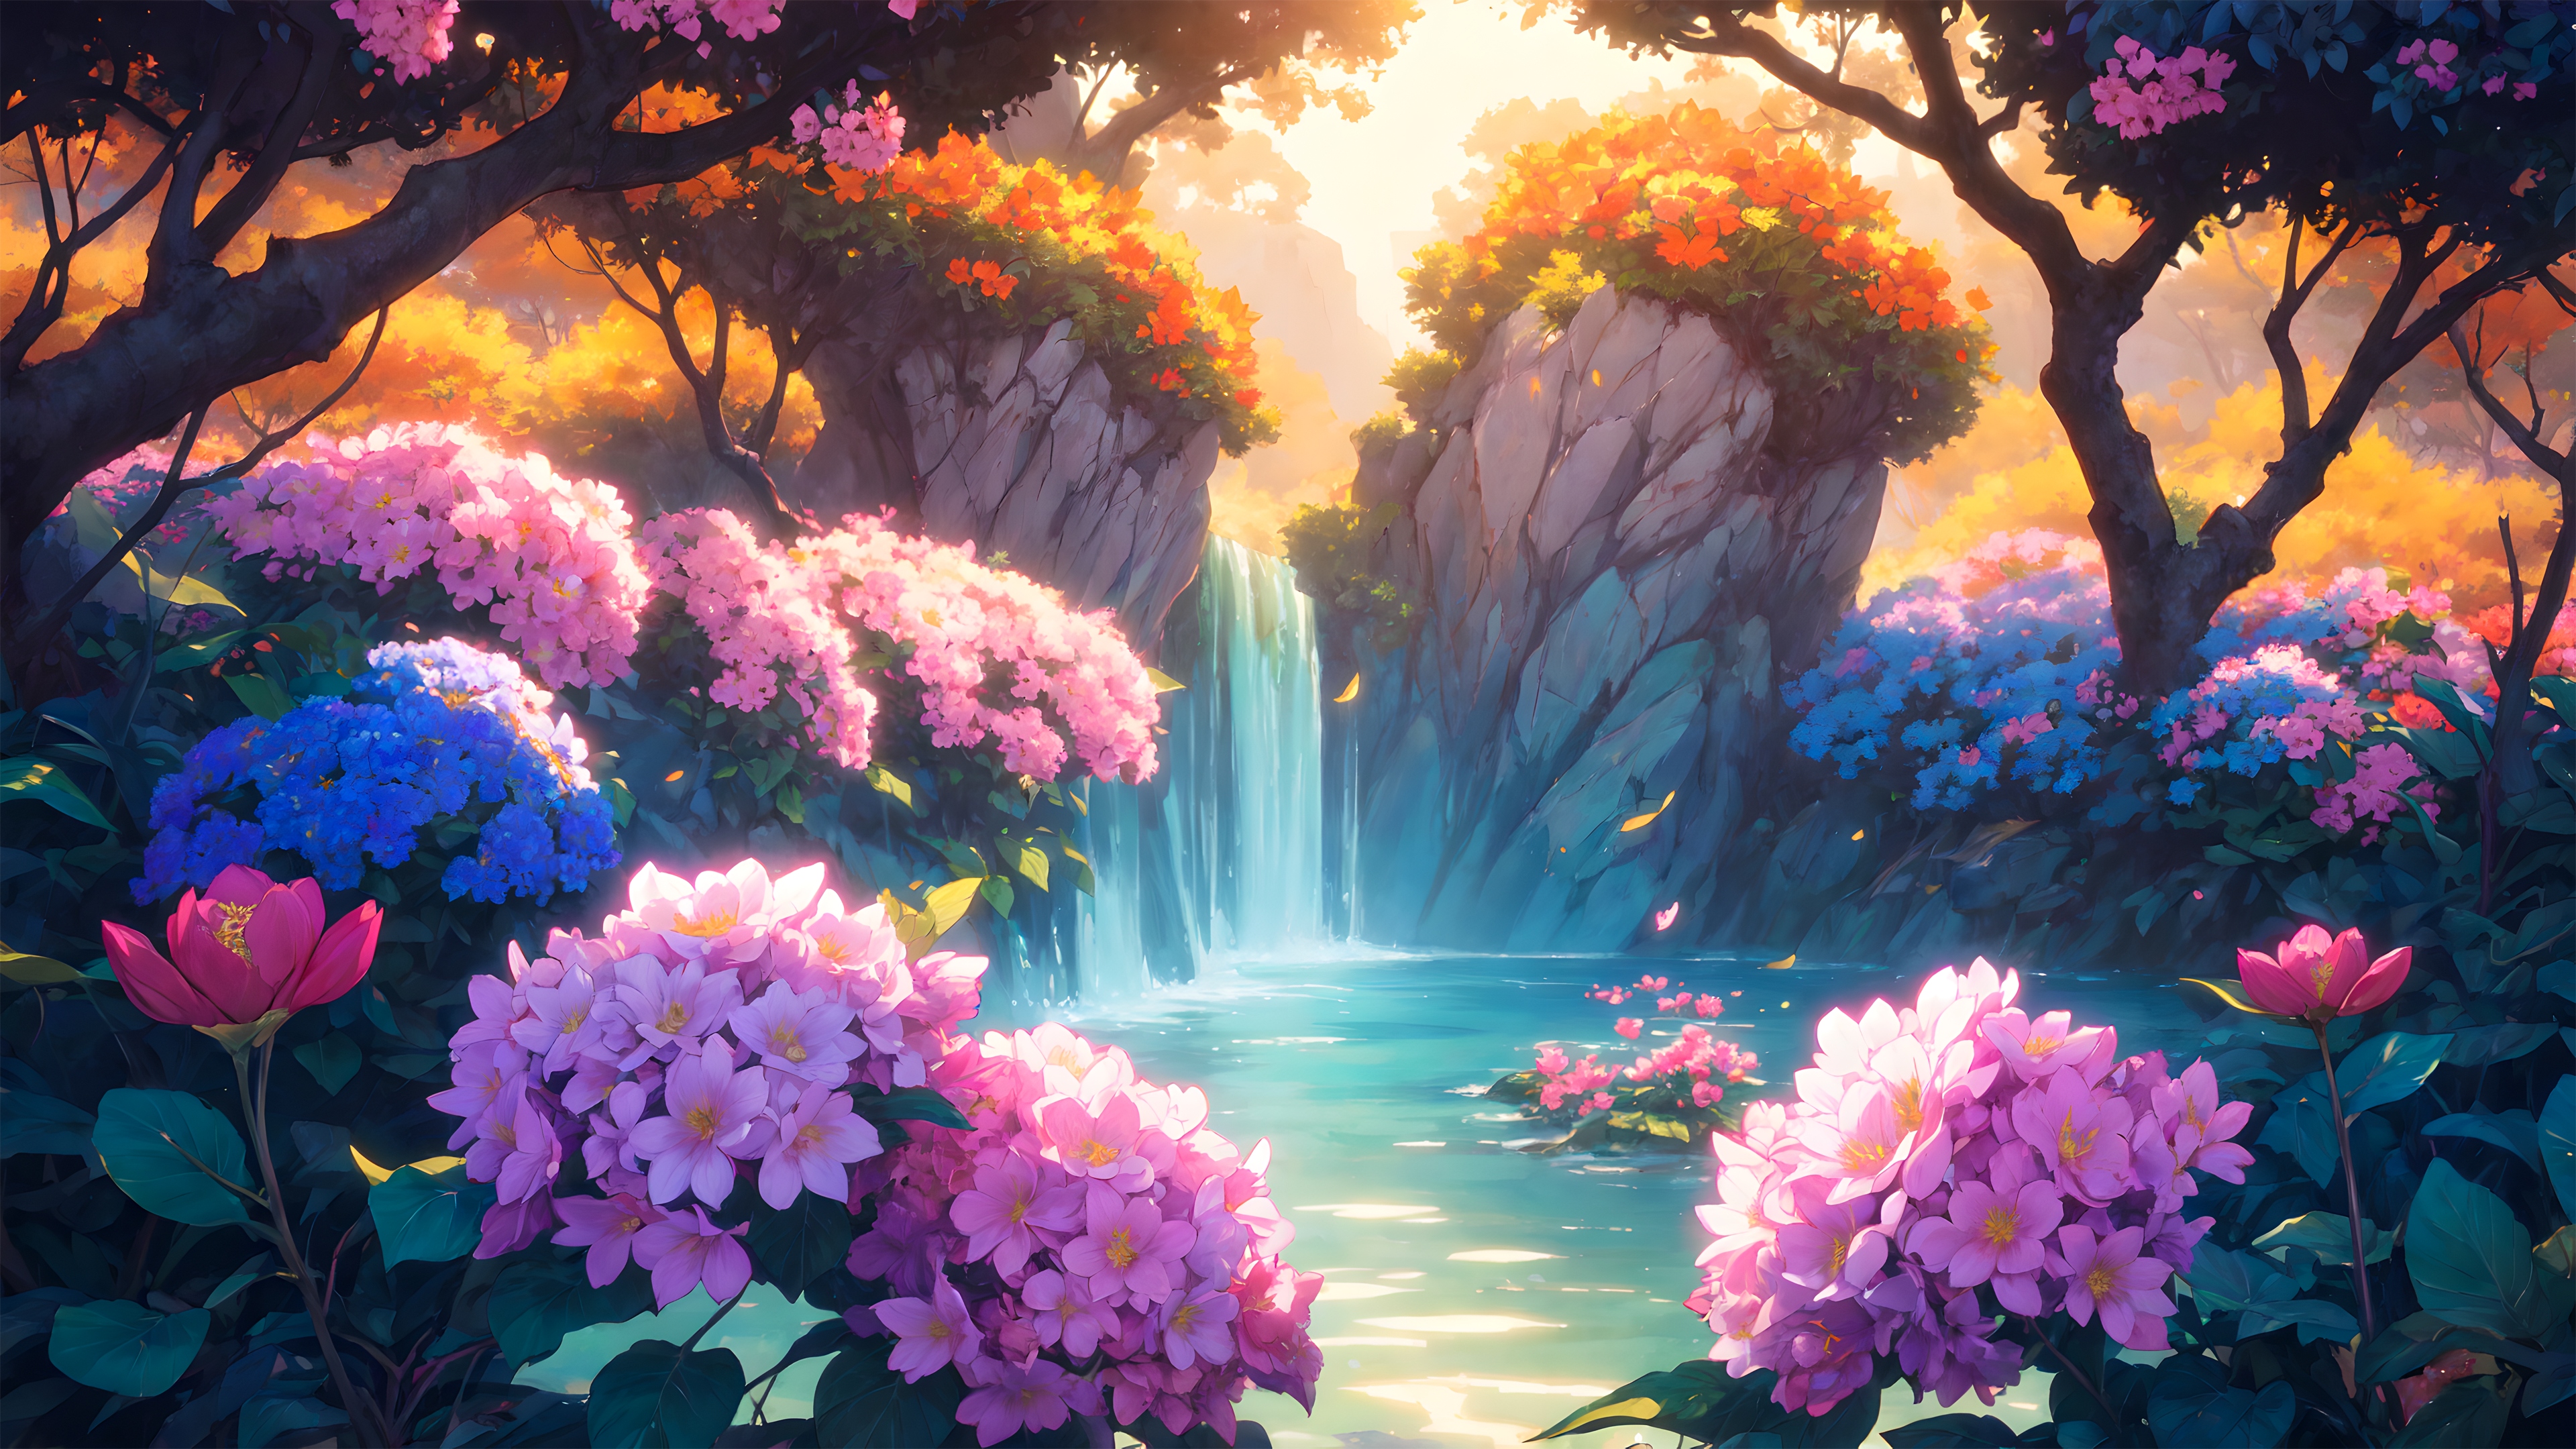 The waterfall full of flowers